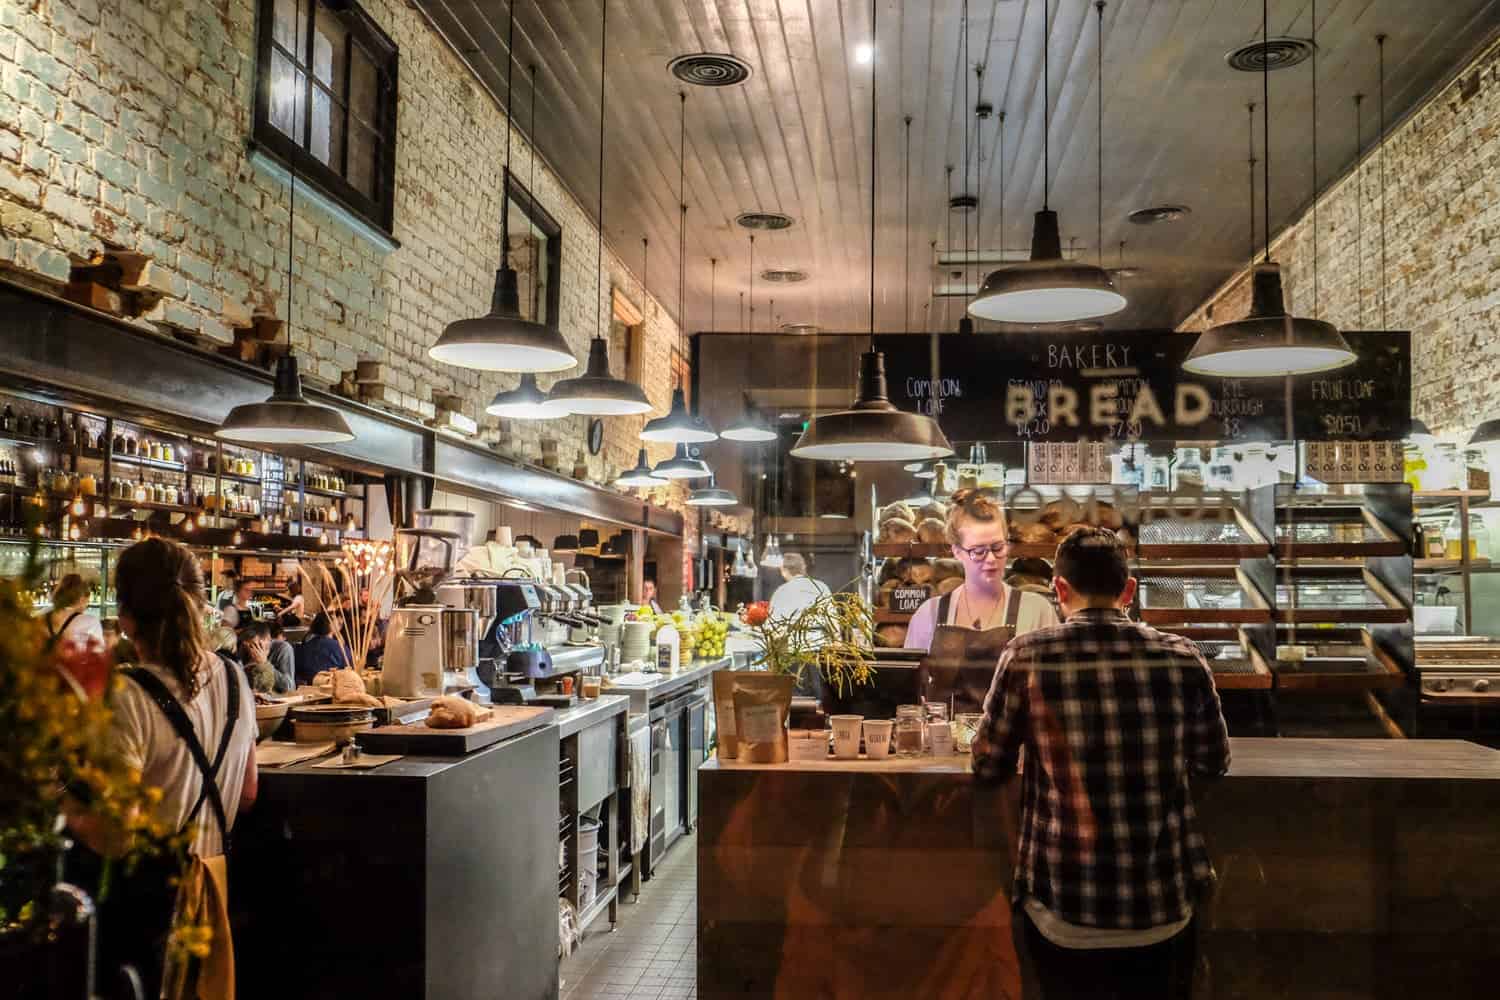 A bakery and coffee shop in a repurposed warehouse space in Freemantle, Perth